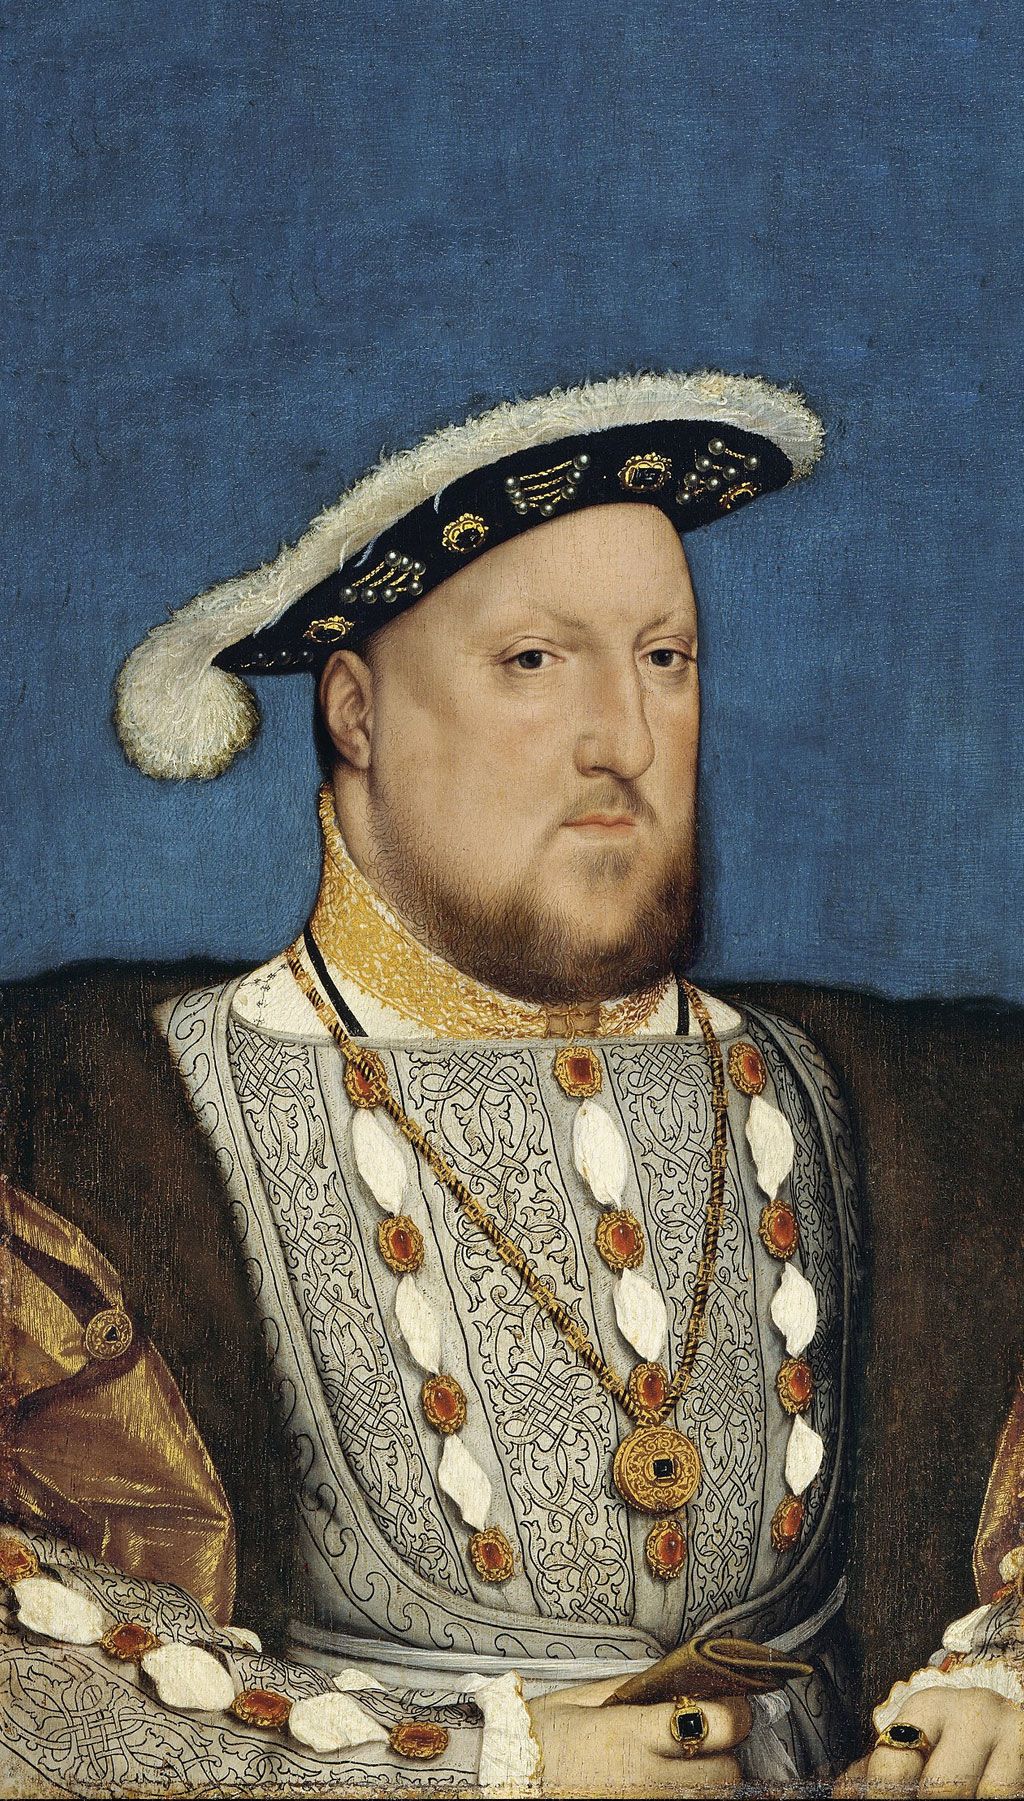 A circa 1537 portrait of Henry by Hans Holbein the Younger